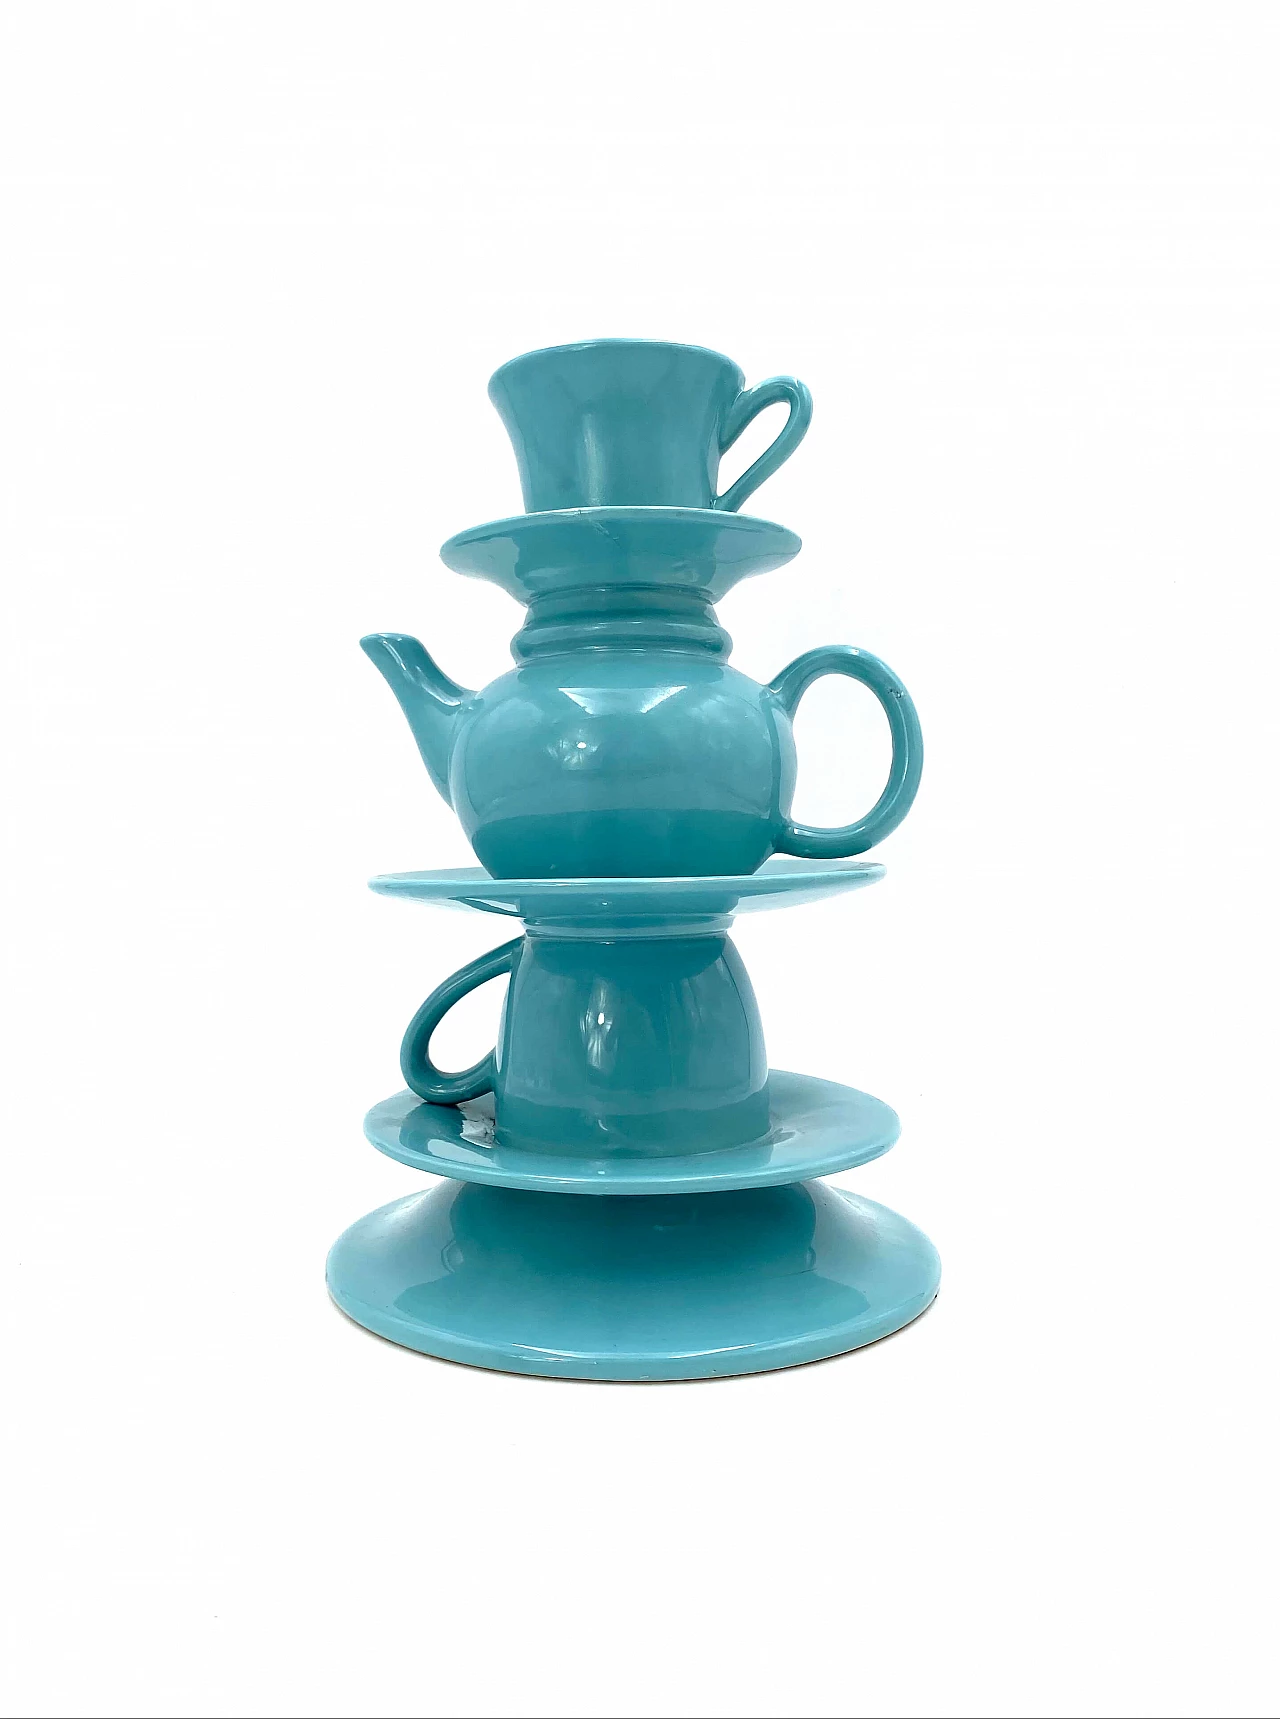 Vase in the shape of stacked blue teacups, 80s 1251793